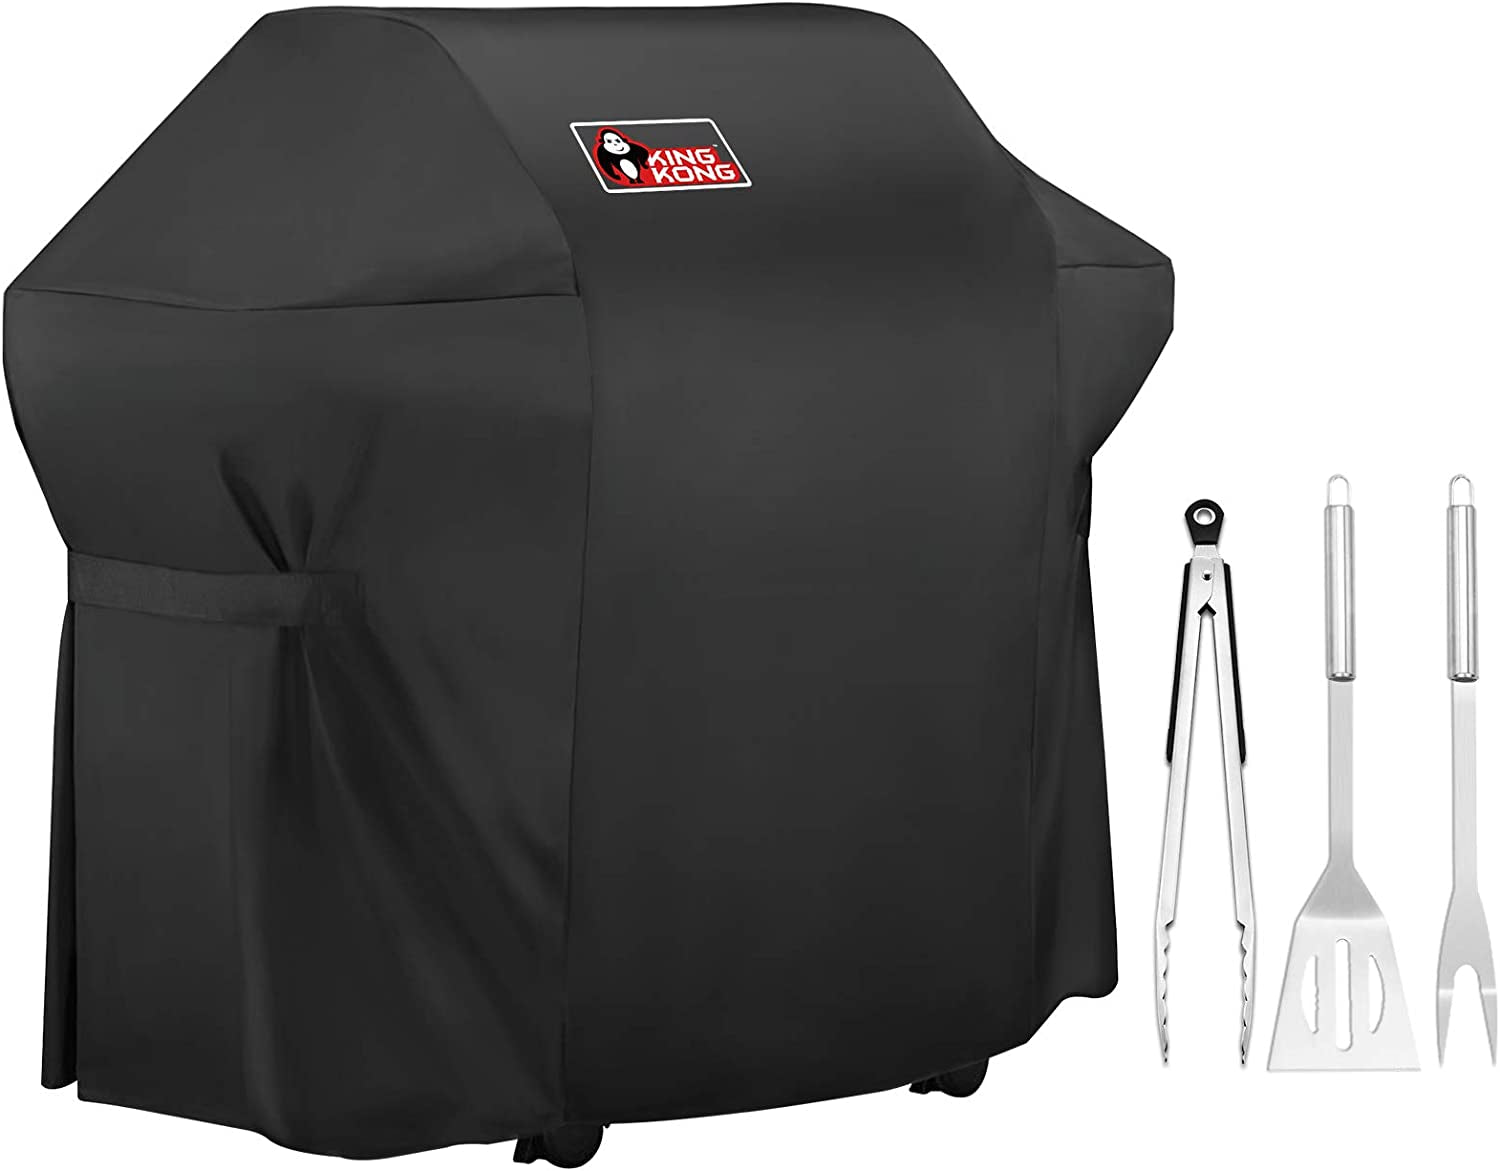 Kingkong, Kingkong 7107 Waterproof BBQ Cover for Weber Genesis E and S Series Gas Grill Including Stainless Steel Meat Fork, Spatula and Tongs, Genesis E/S-60